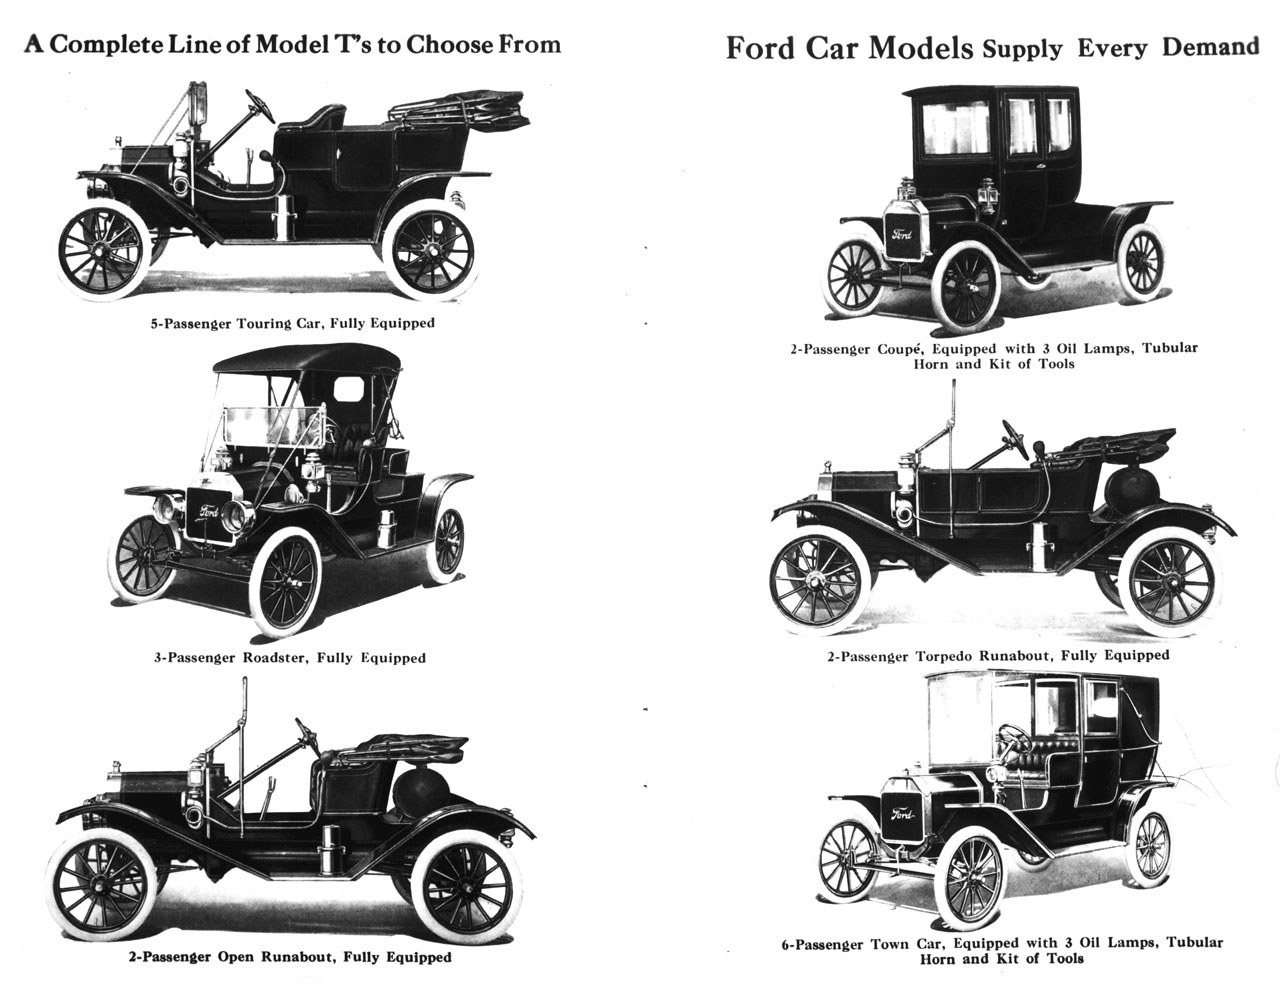 Henry ford develops the assembly line to produce model t's #8